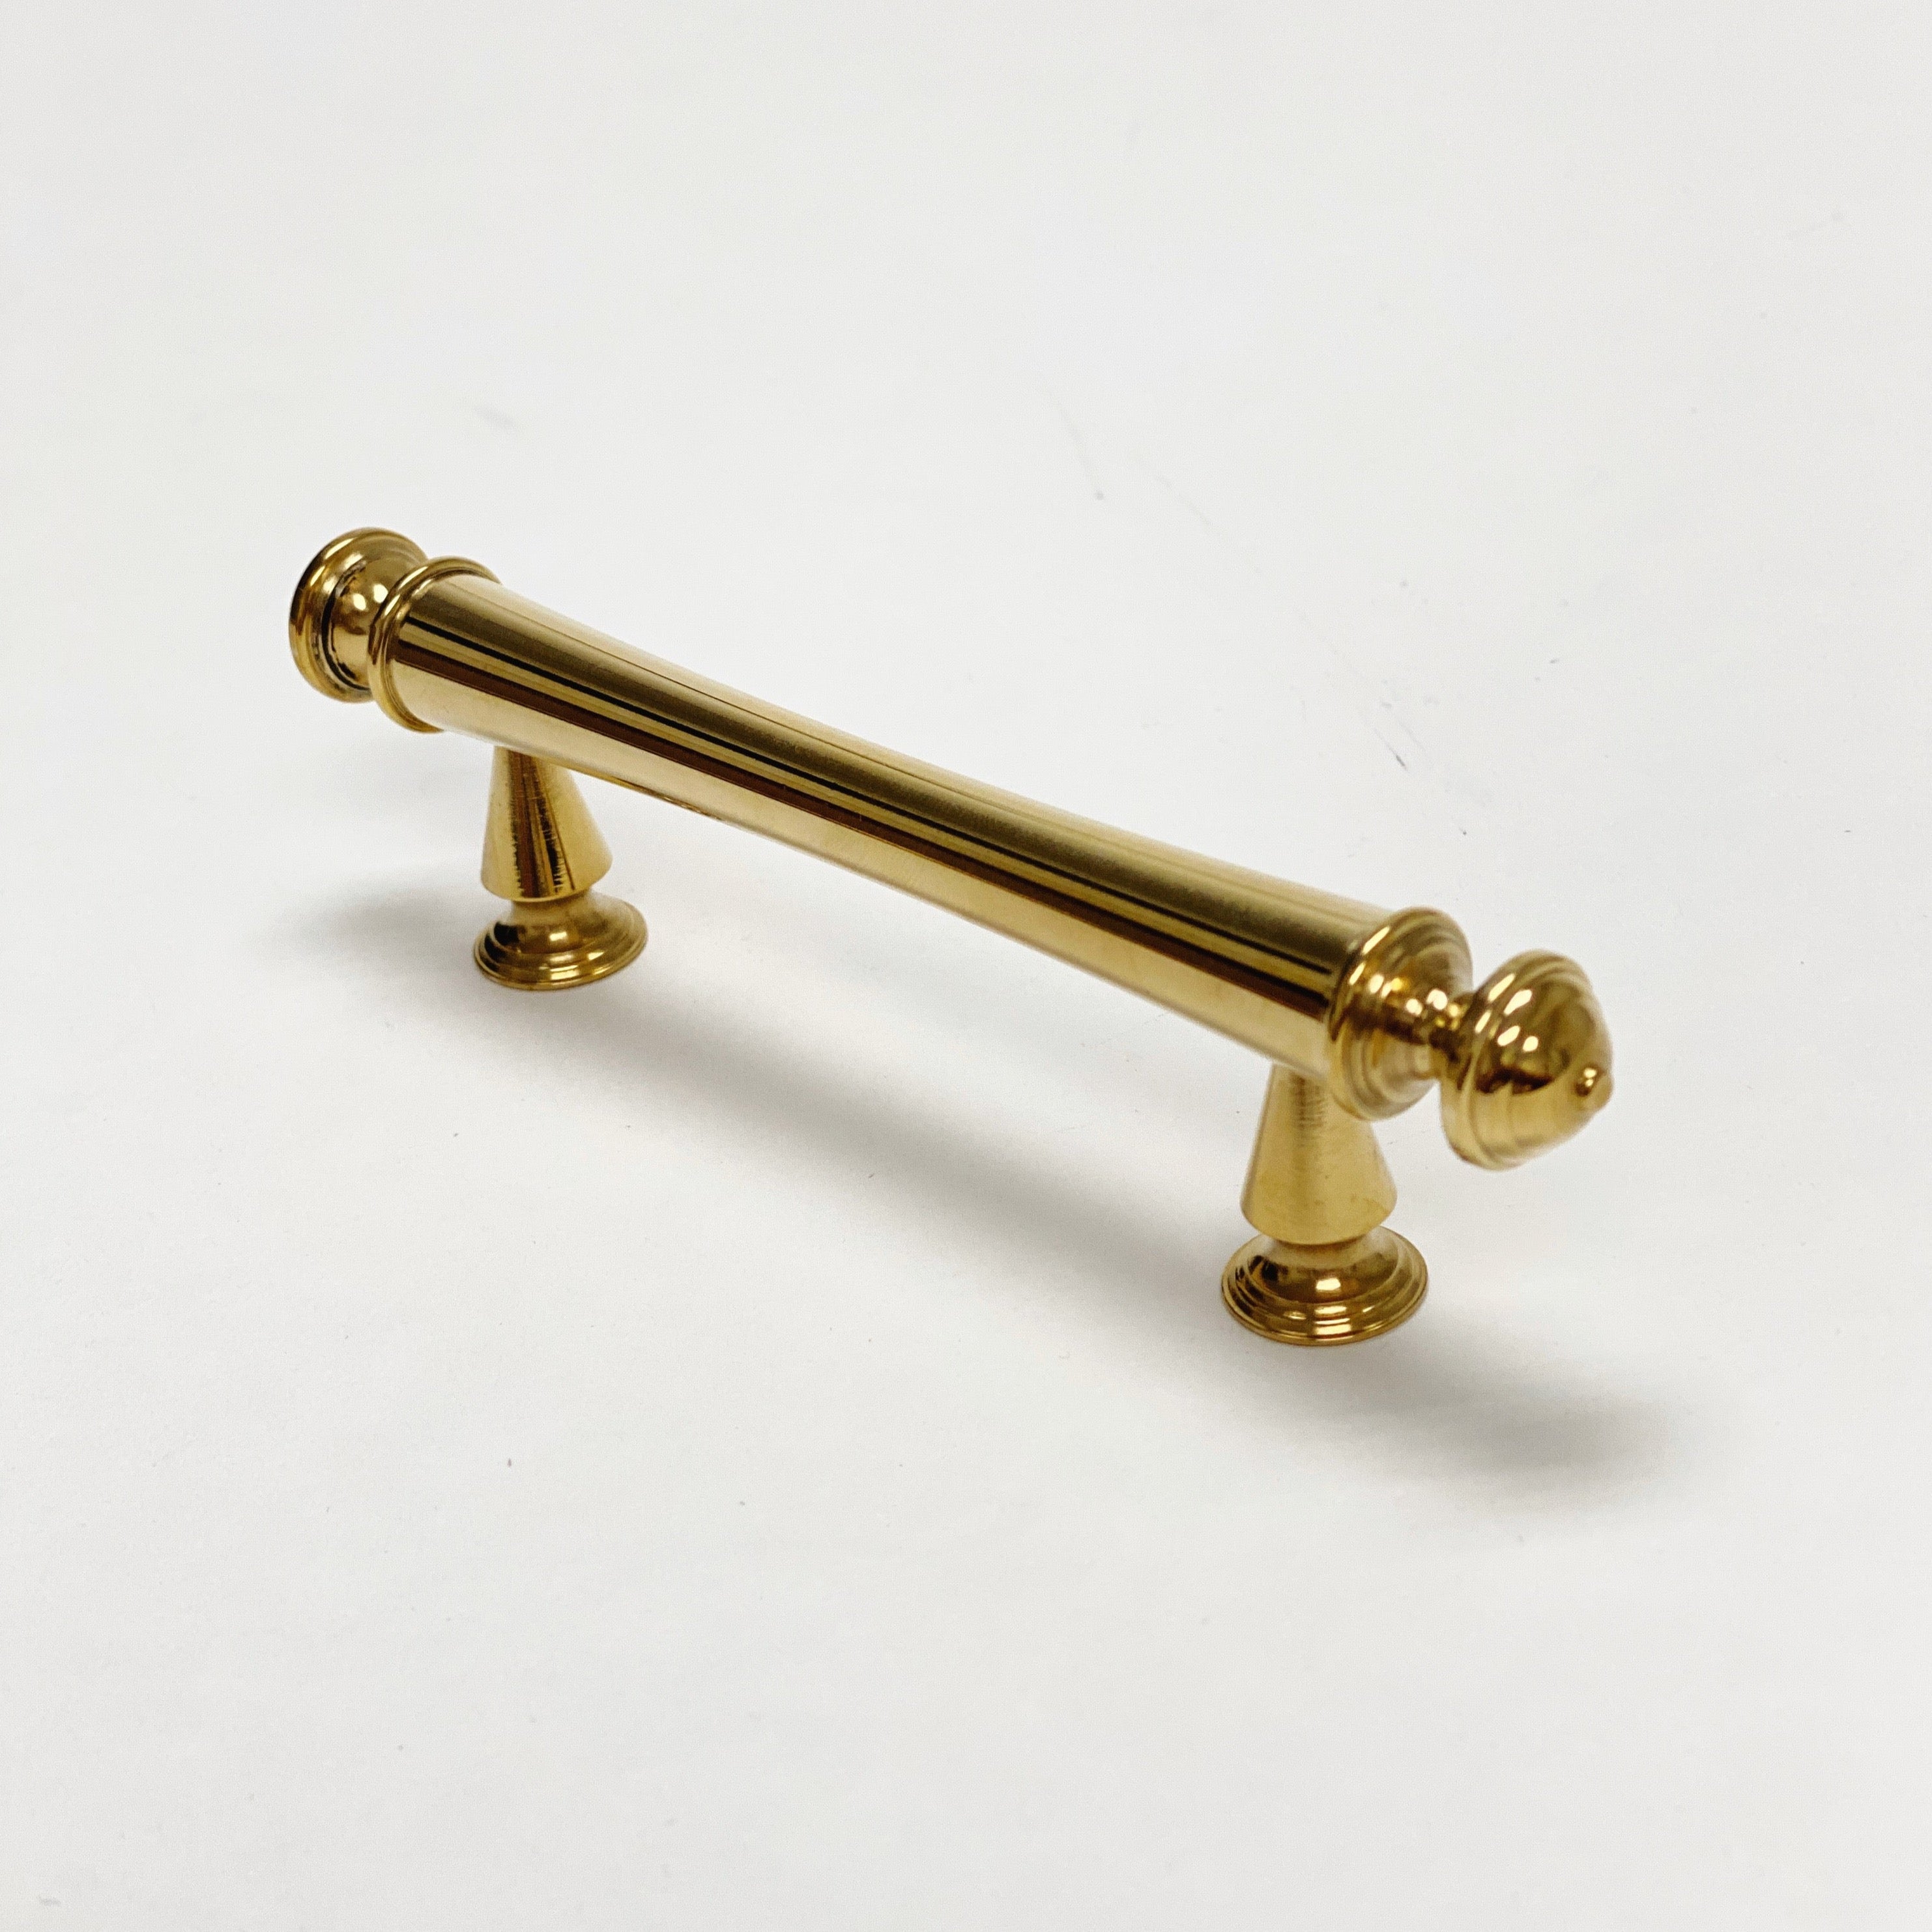 Unlacquered Brass "Emmeline" Cabinet Knobs and Drawer Pull